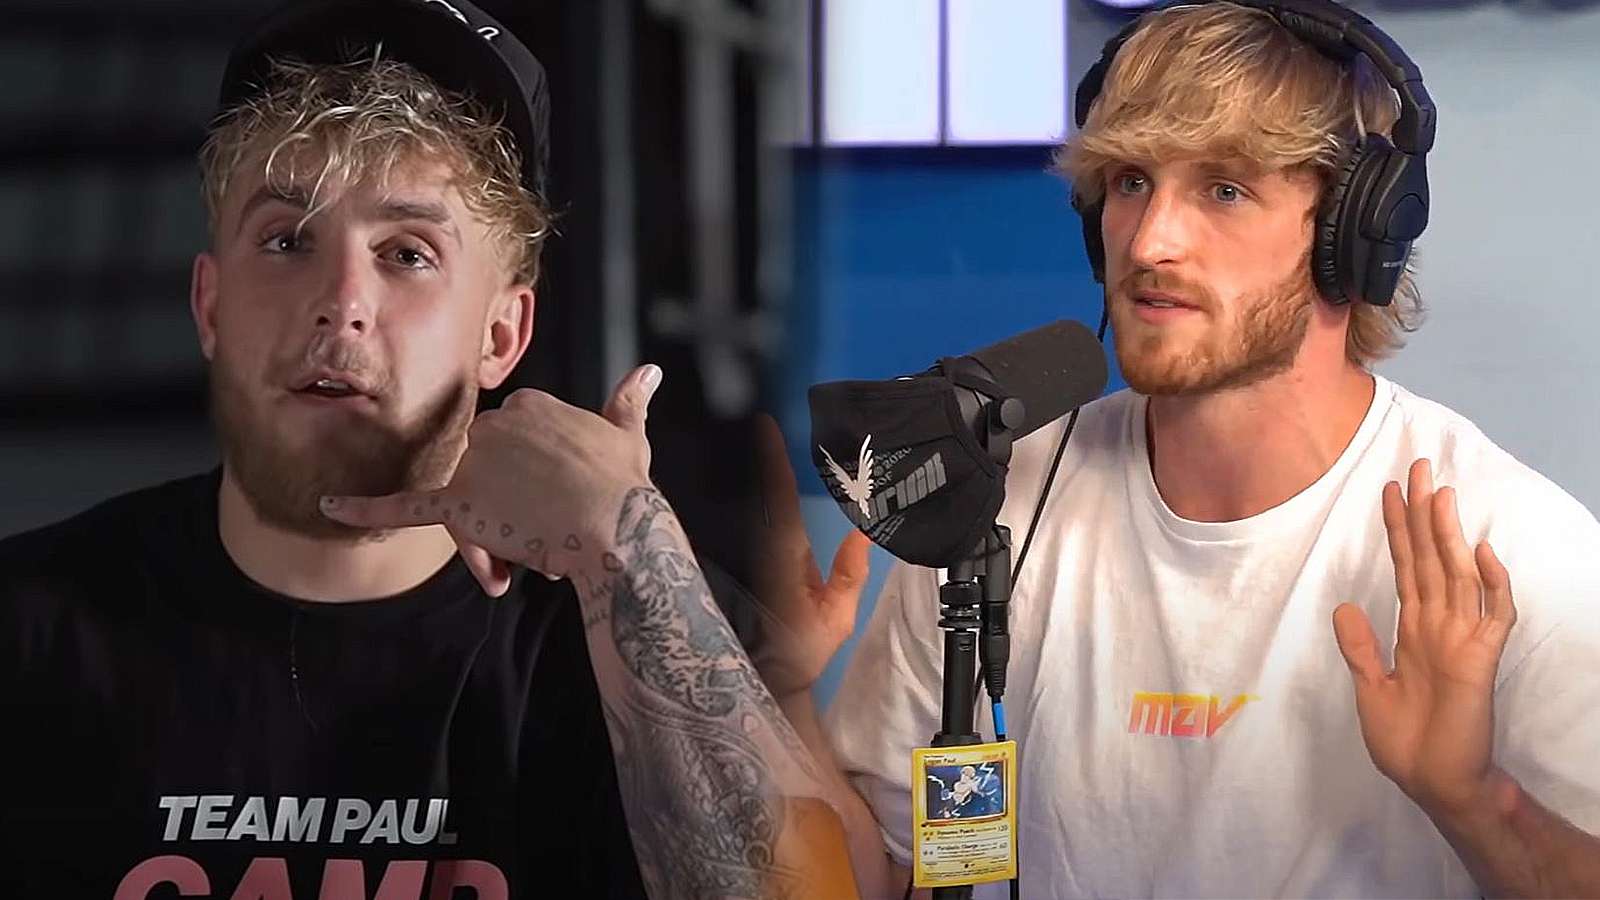 Photos of Jake Paul and Logan Paul are shown side by side.